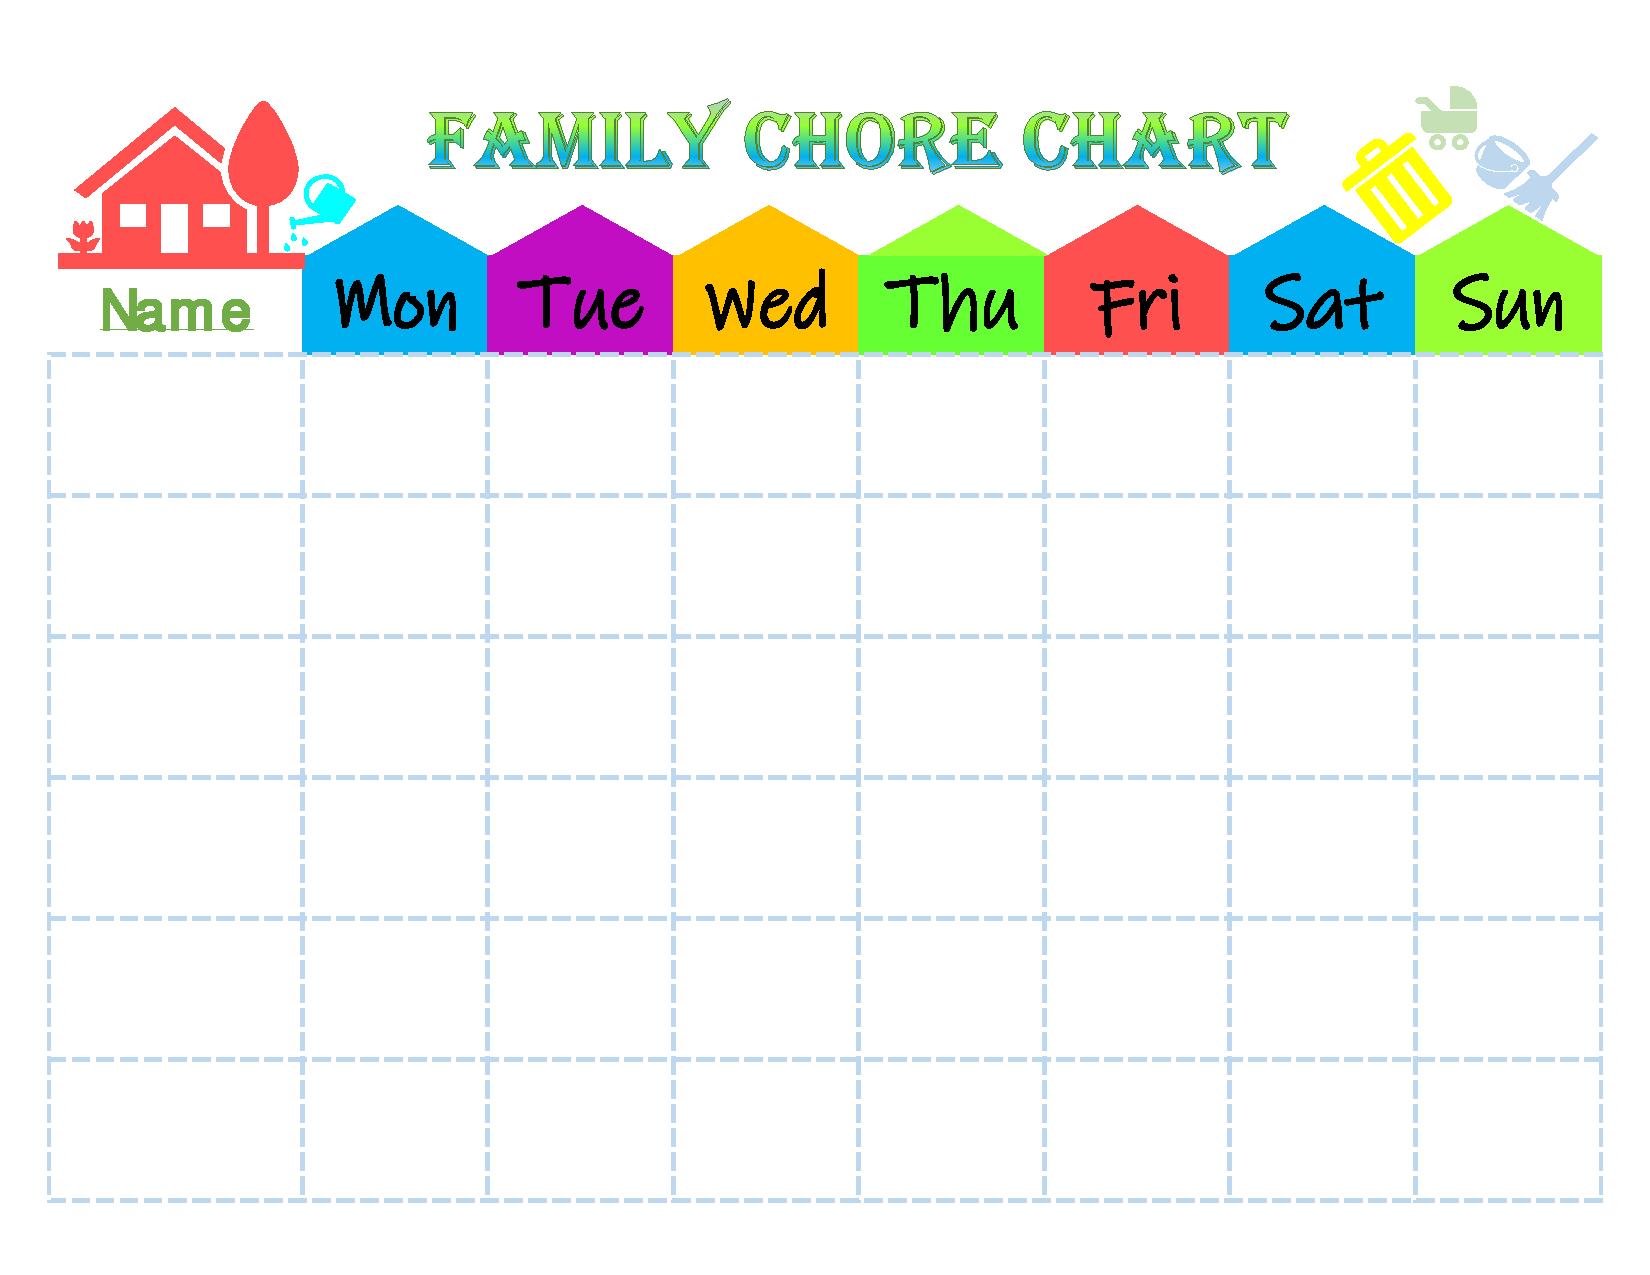 family-chore-chart-printable-download